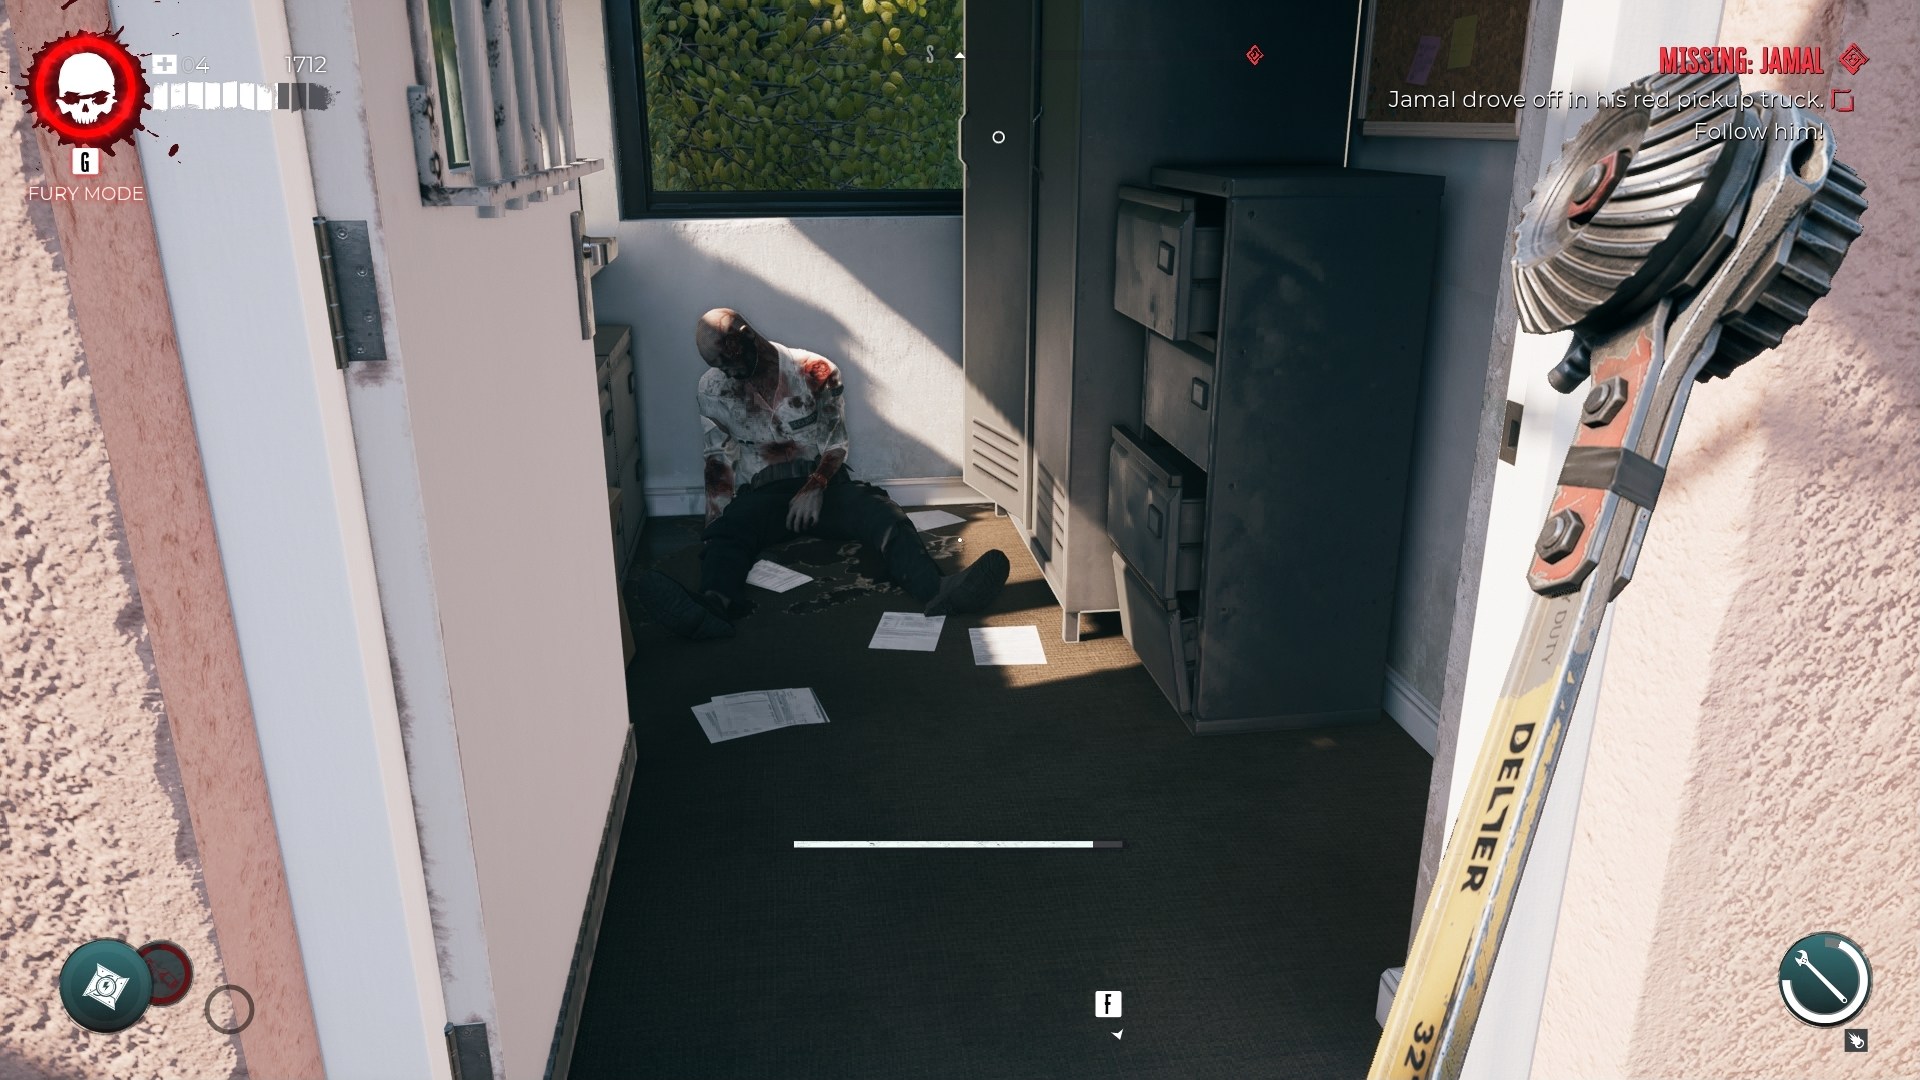 Dead Island 2 screenshot showing a corpse sitting in a ransacked security office.